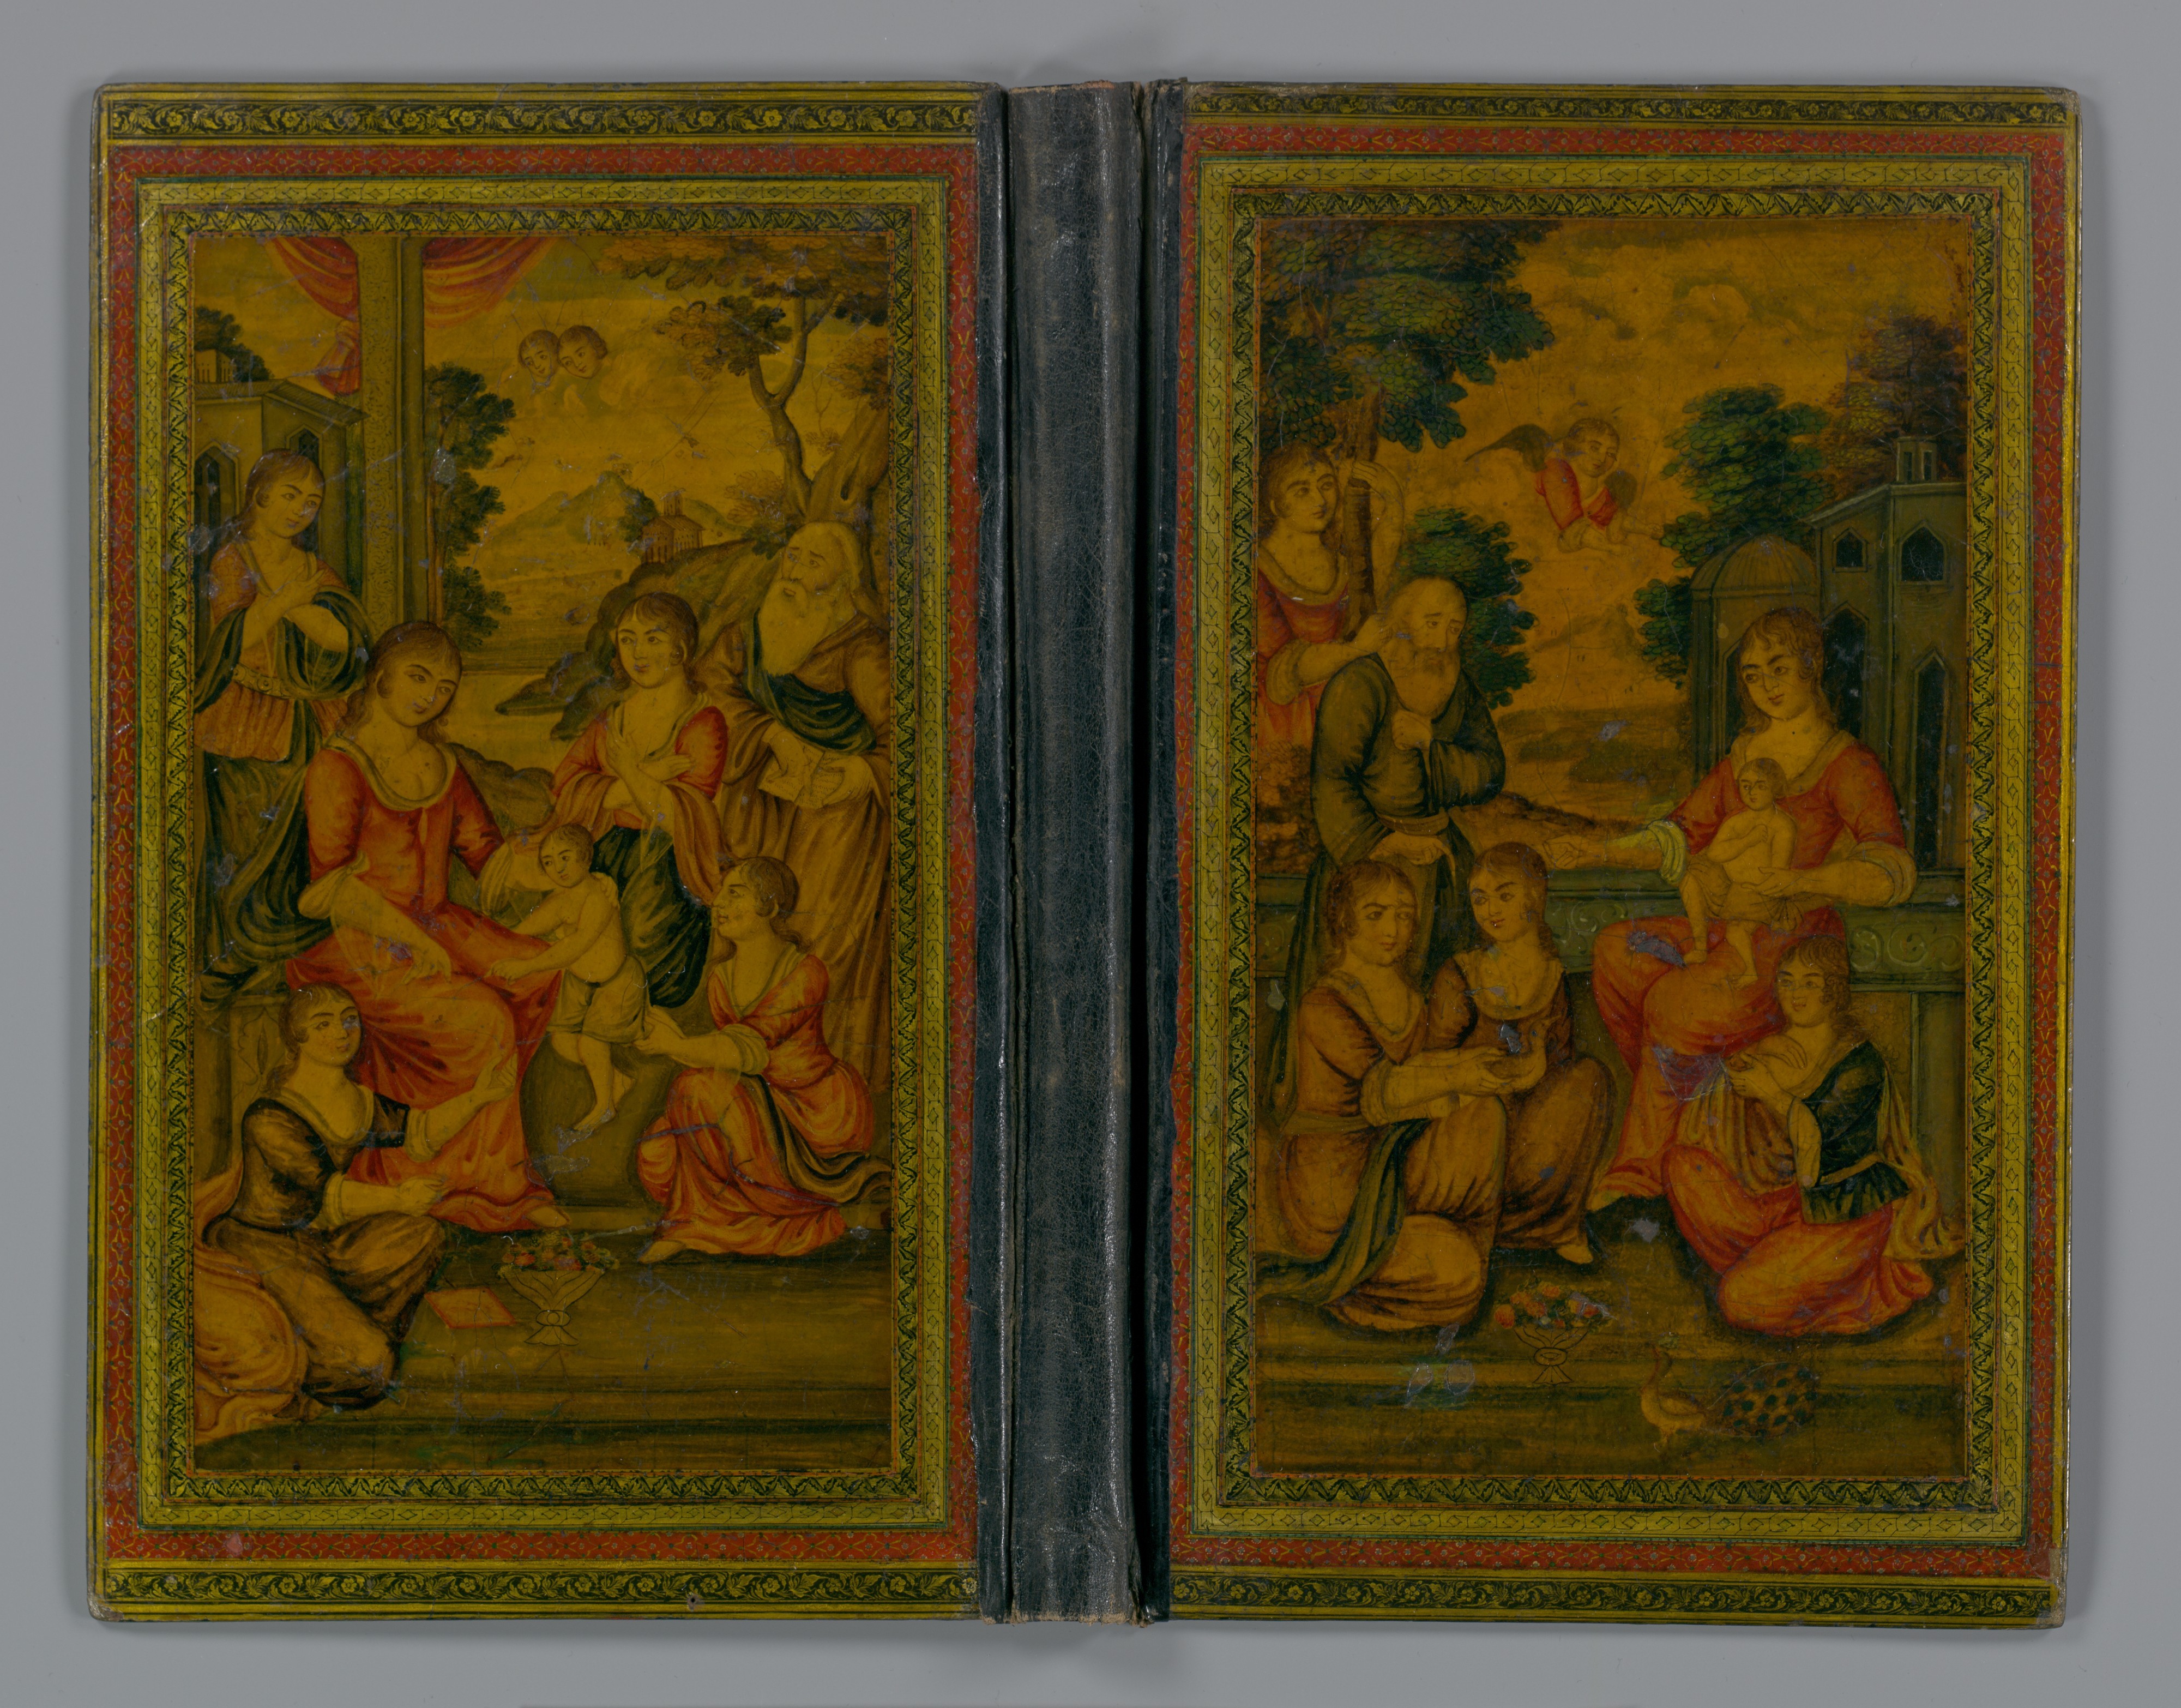 Bookcover with Christian Themes | The Metropolitan Museum of Art